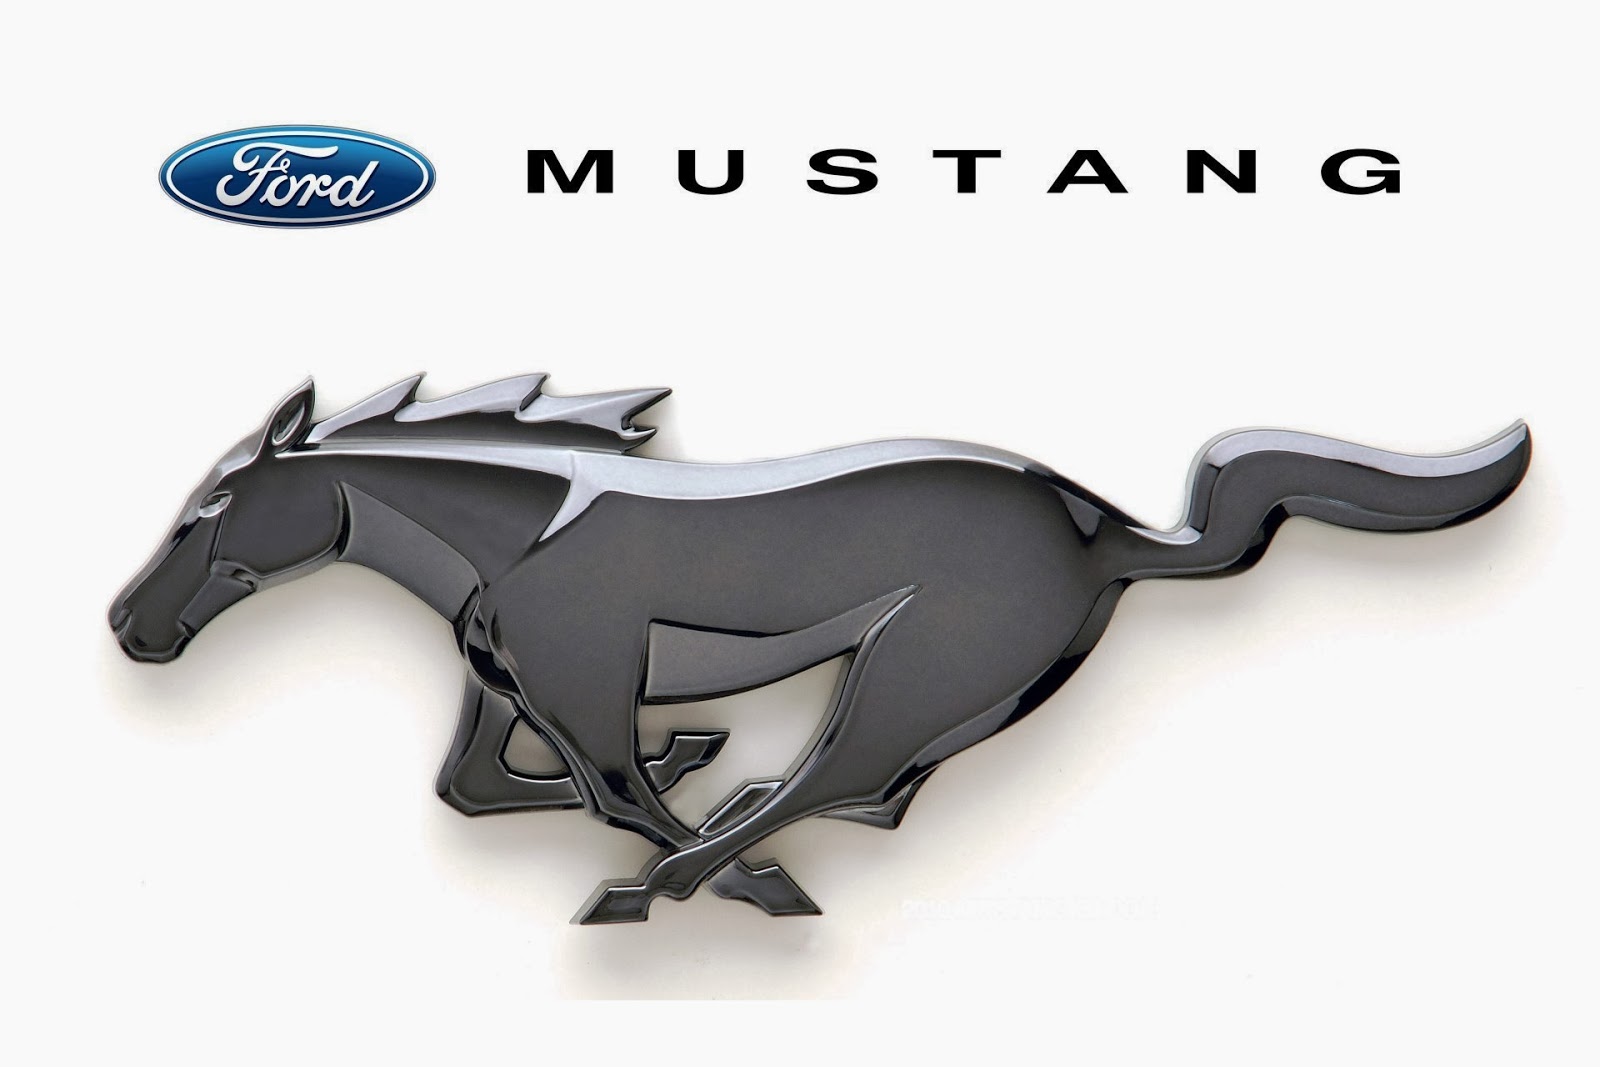 ford mustang logoford mustang logo vectorford mustang logo outline 1600x1067